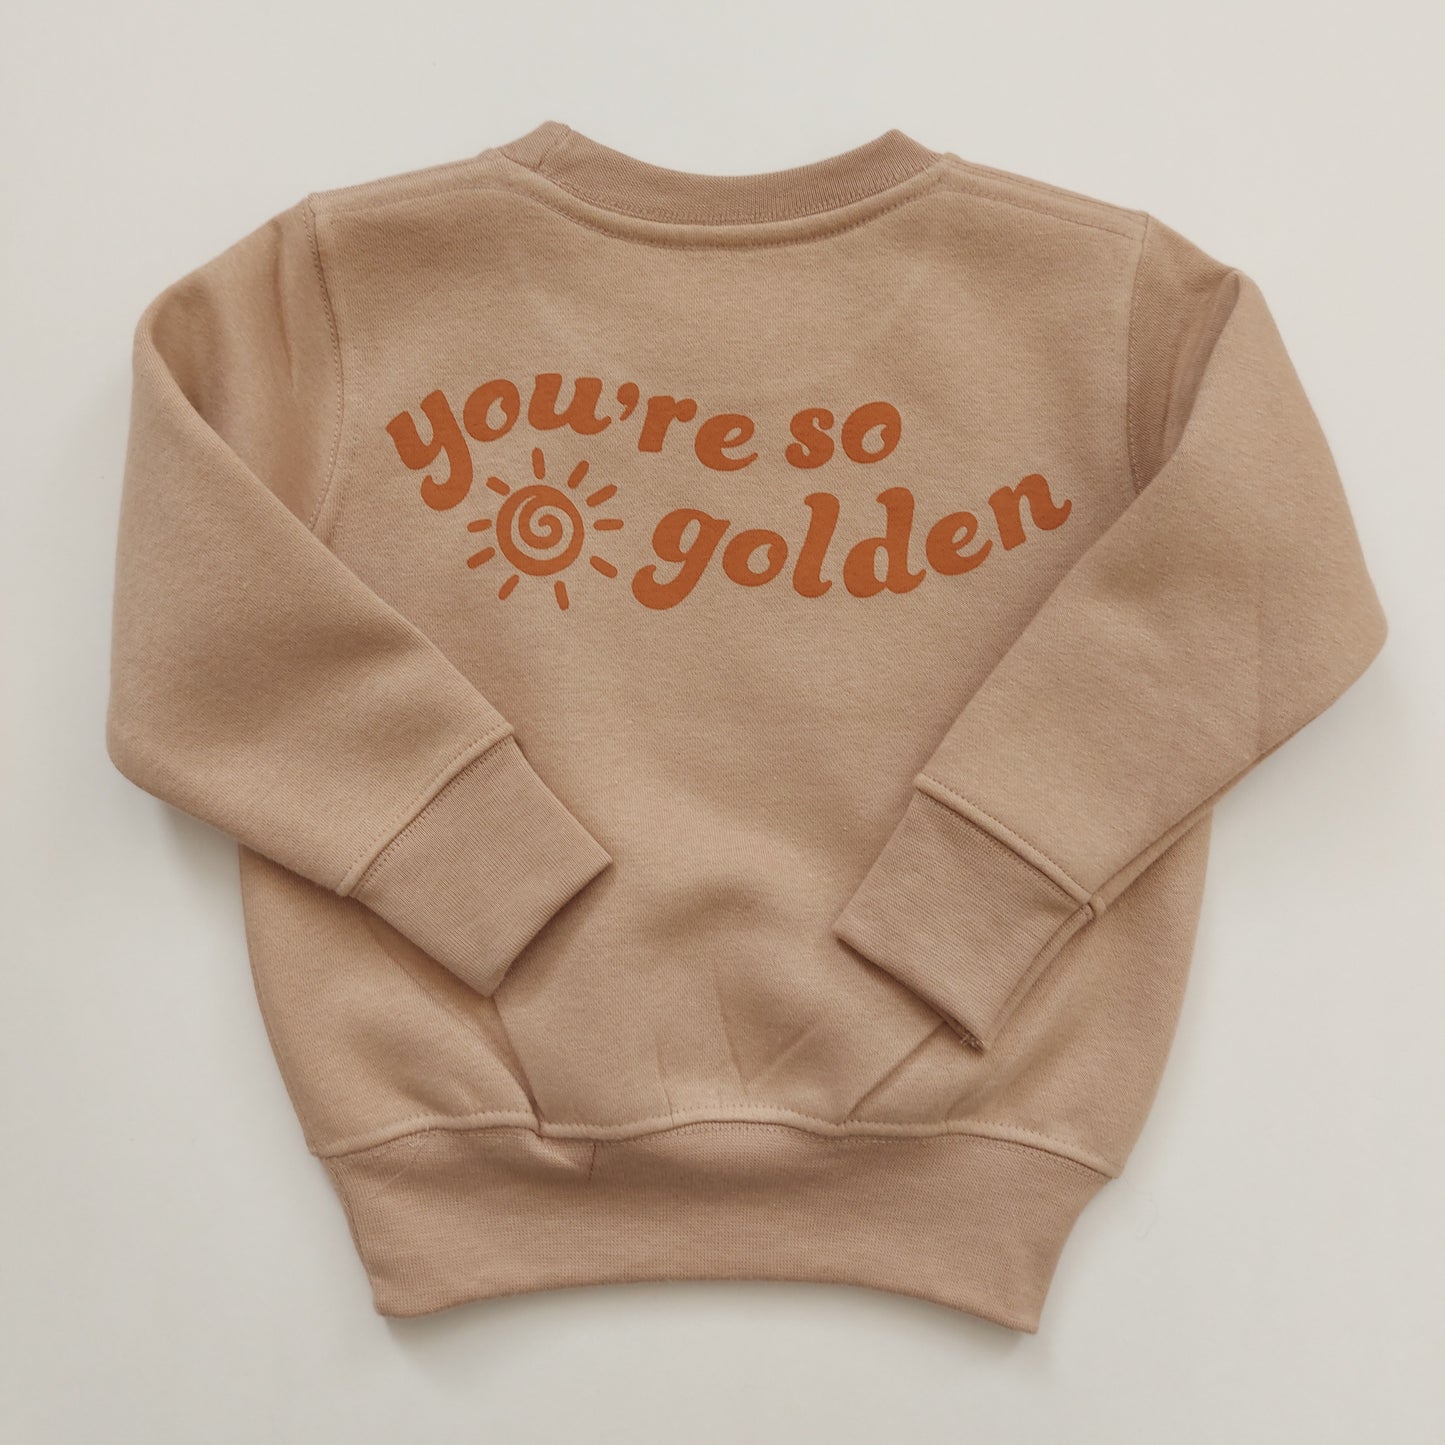 'You're So Golden' Childrens Sweater